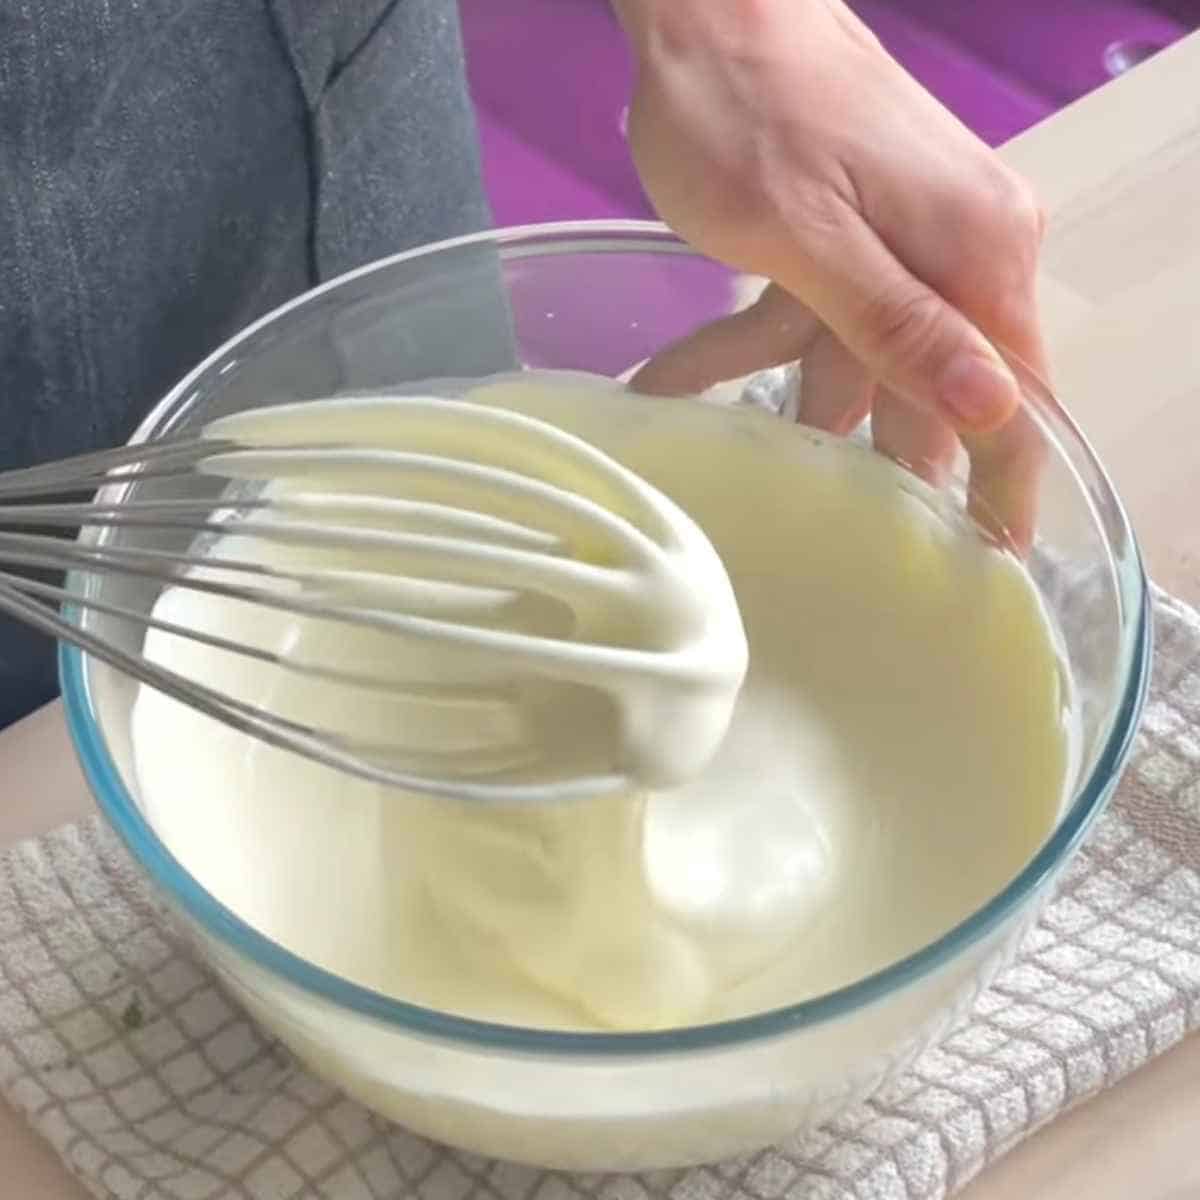 Whipping cream with a hand held whisk